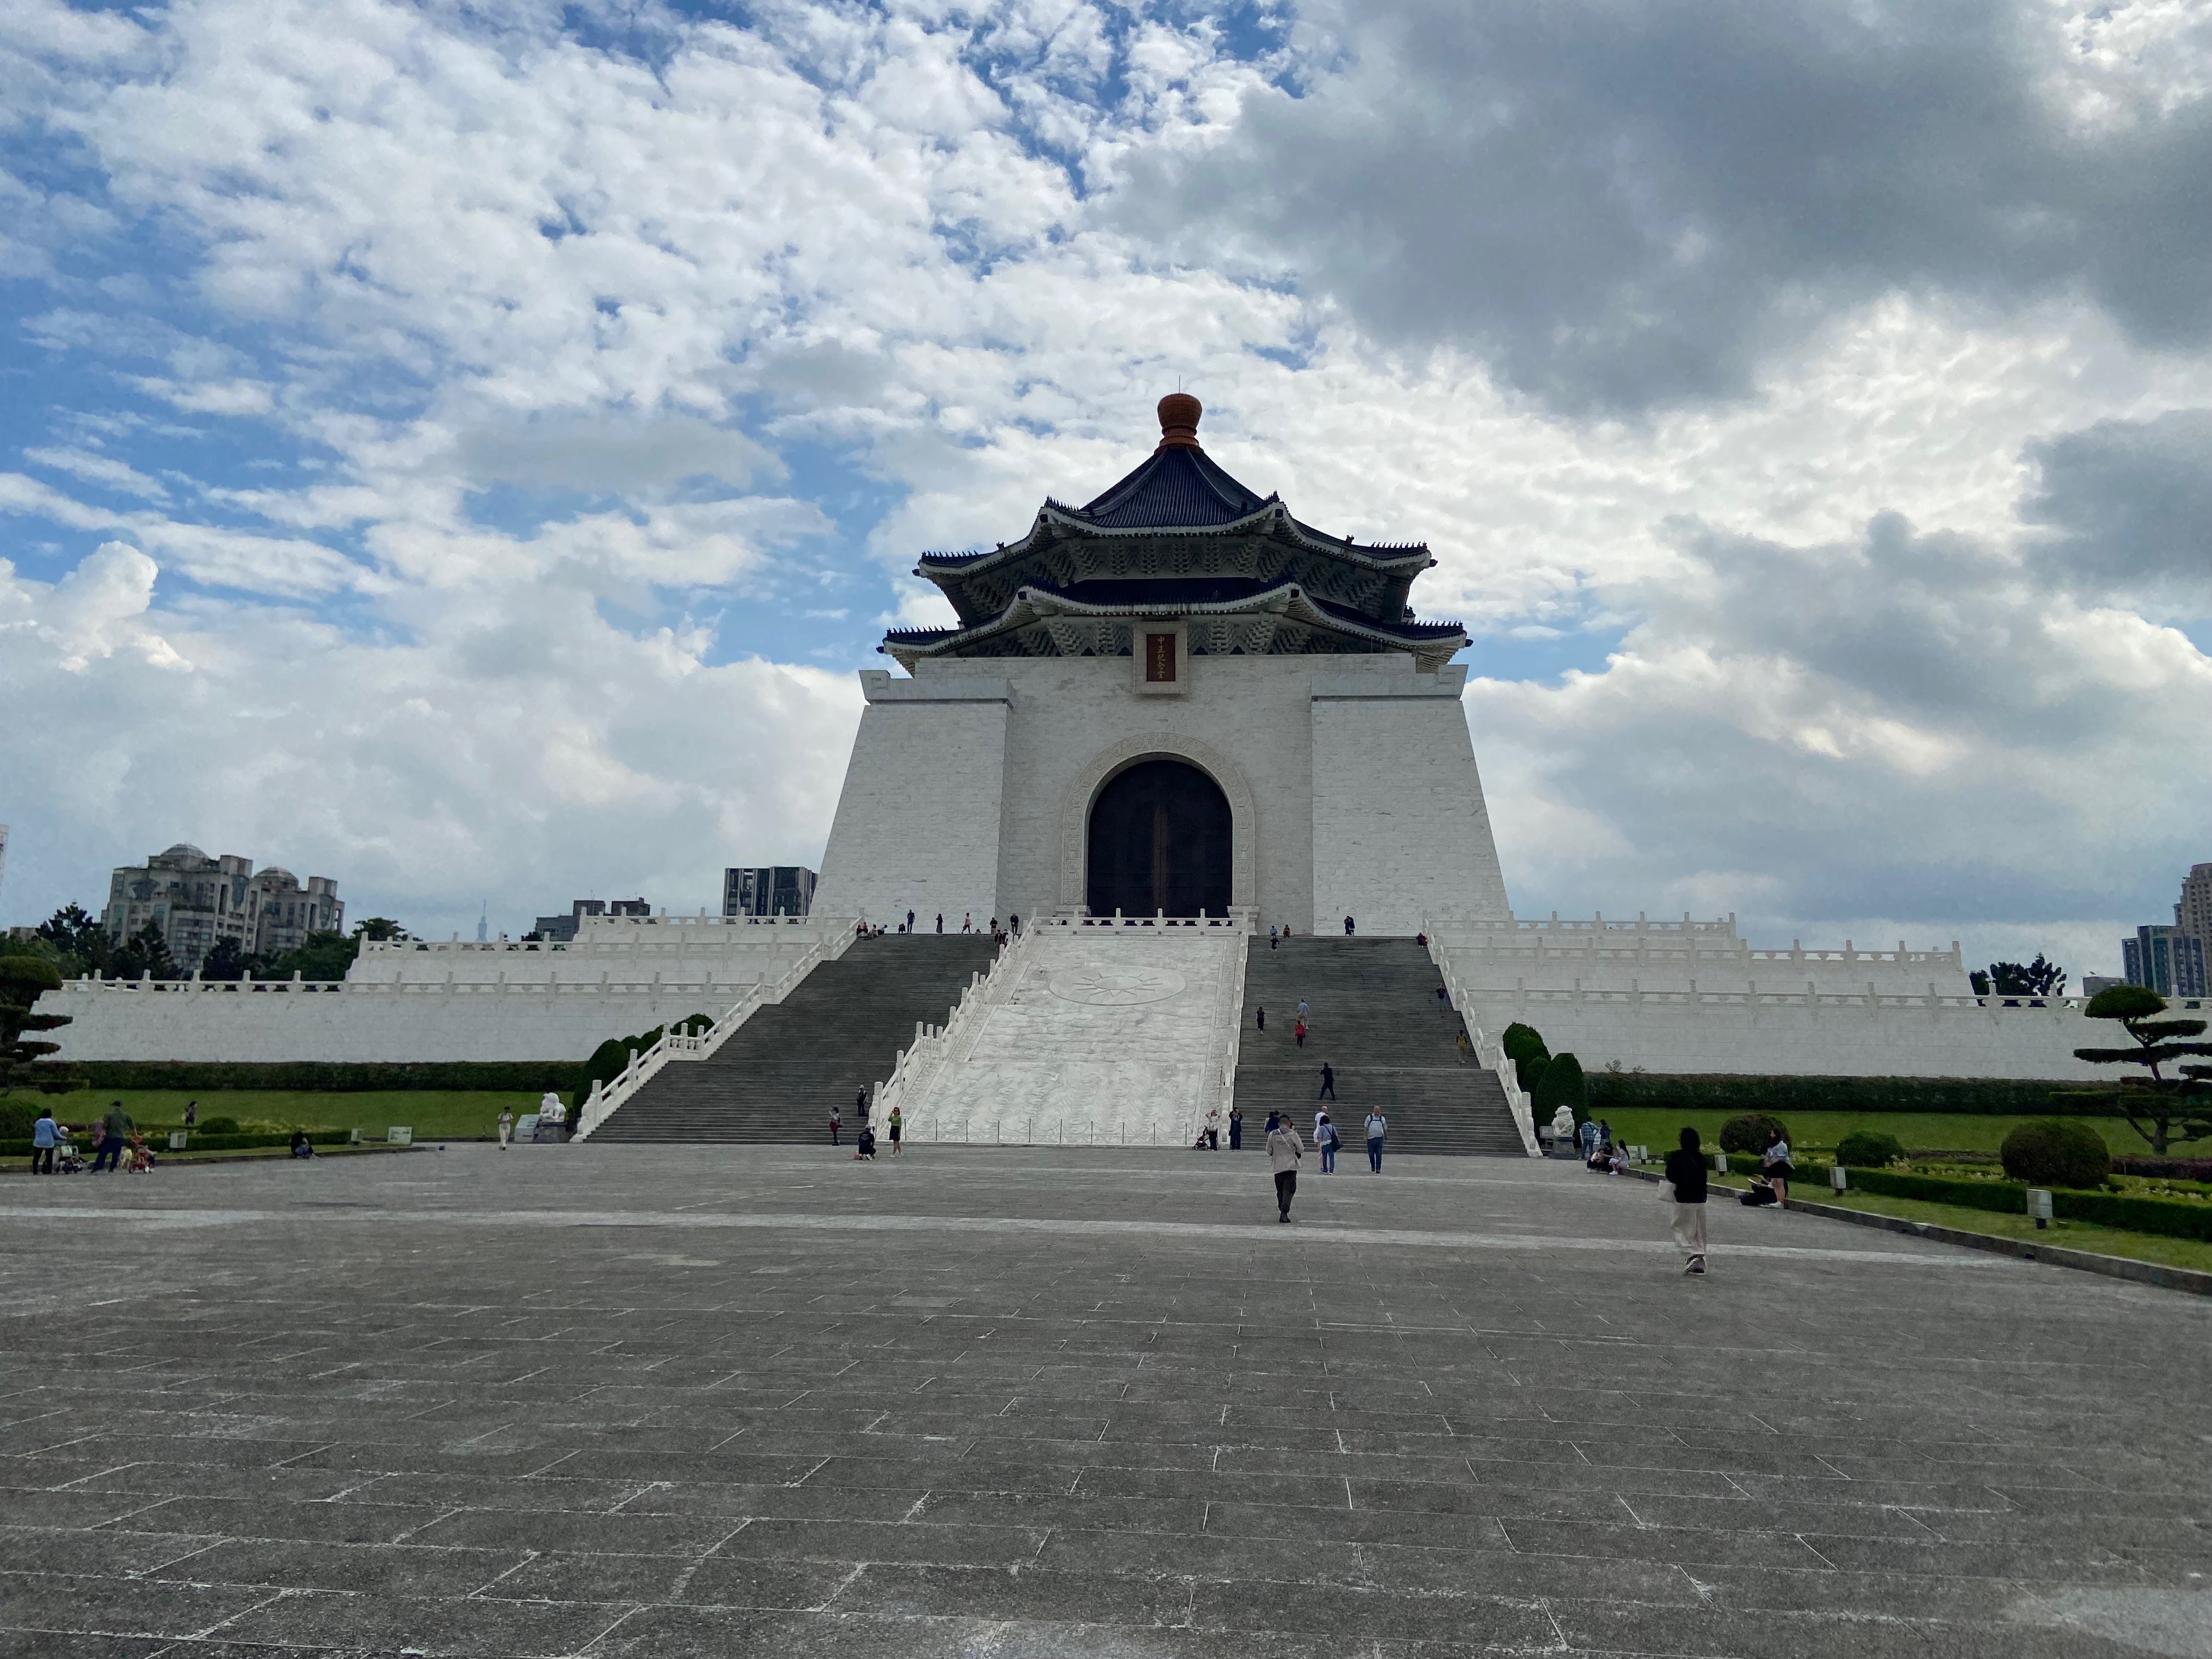 Chiang Kai-Shek Memorial Hall from a distance.